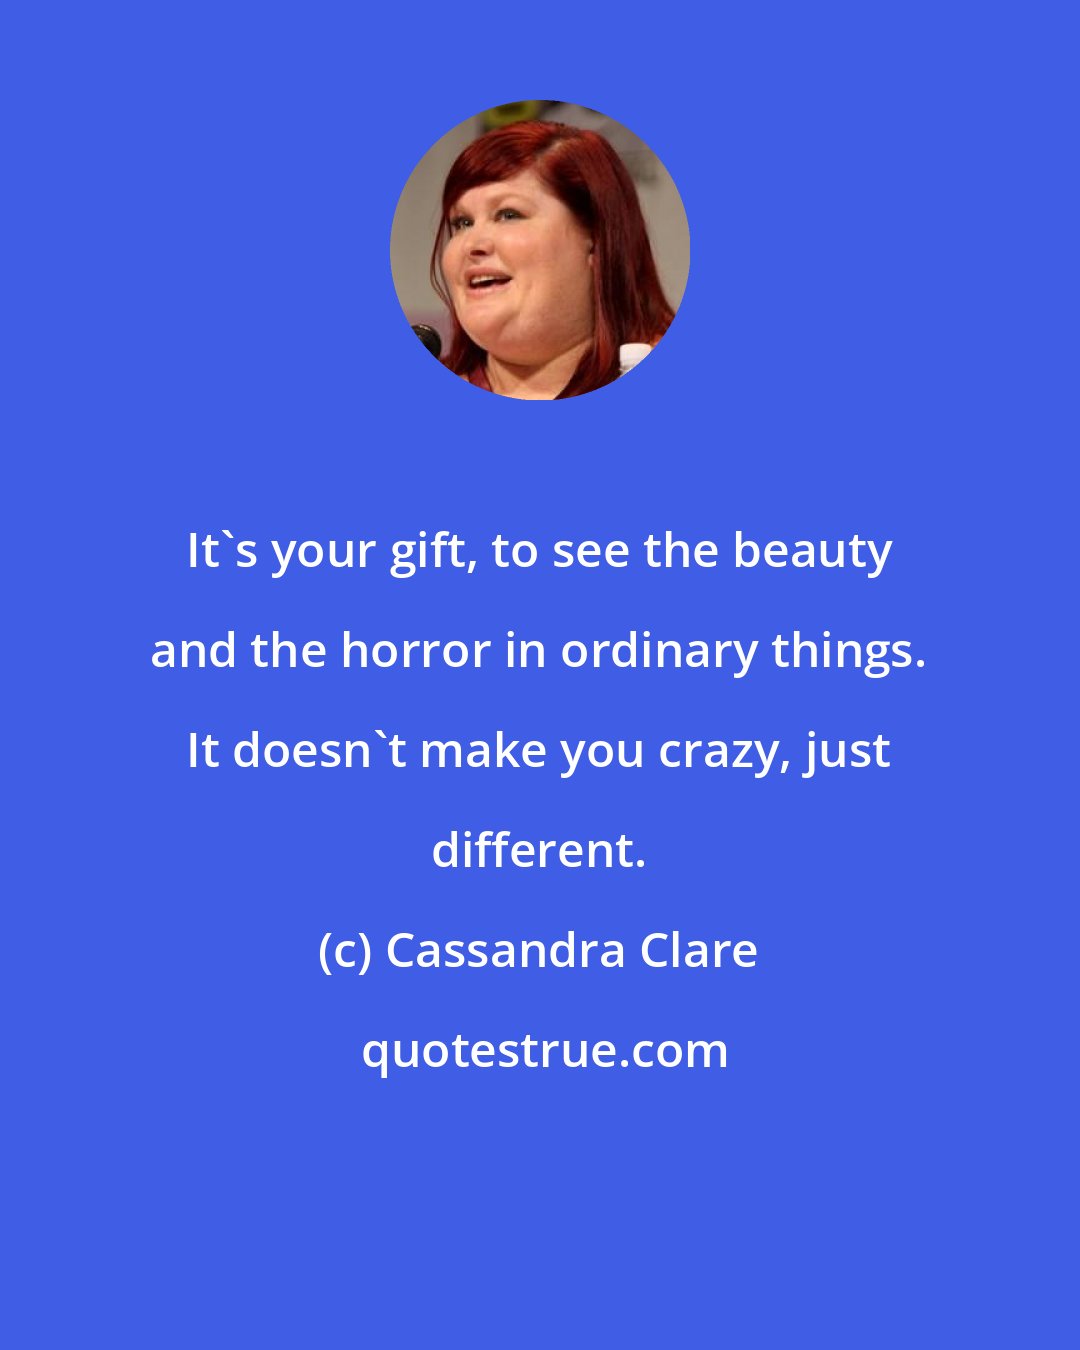 Cassandra Clare: It's your gift, to see the beauty and the horror in ordinary things. It doesn't make you crazy, just different.